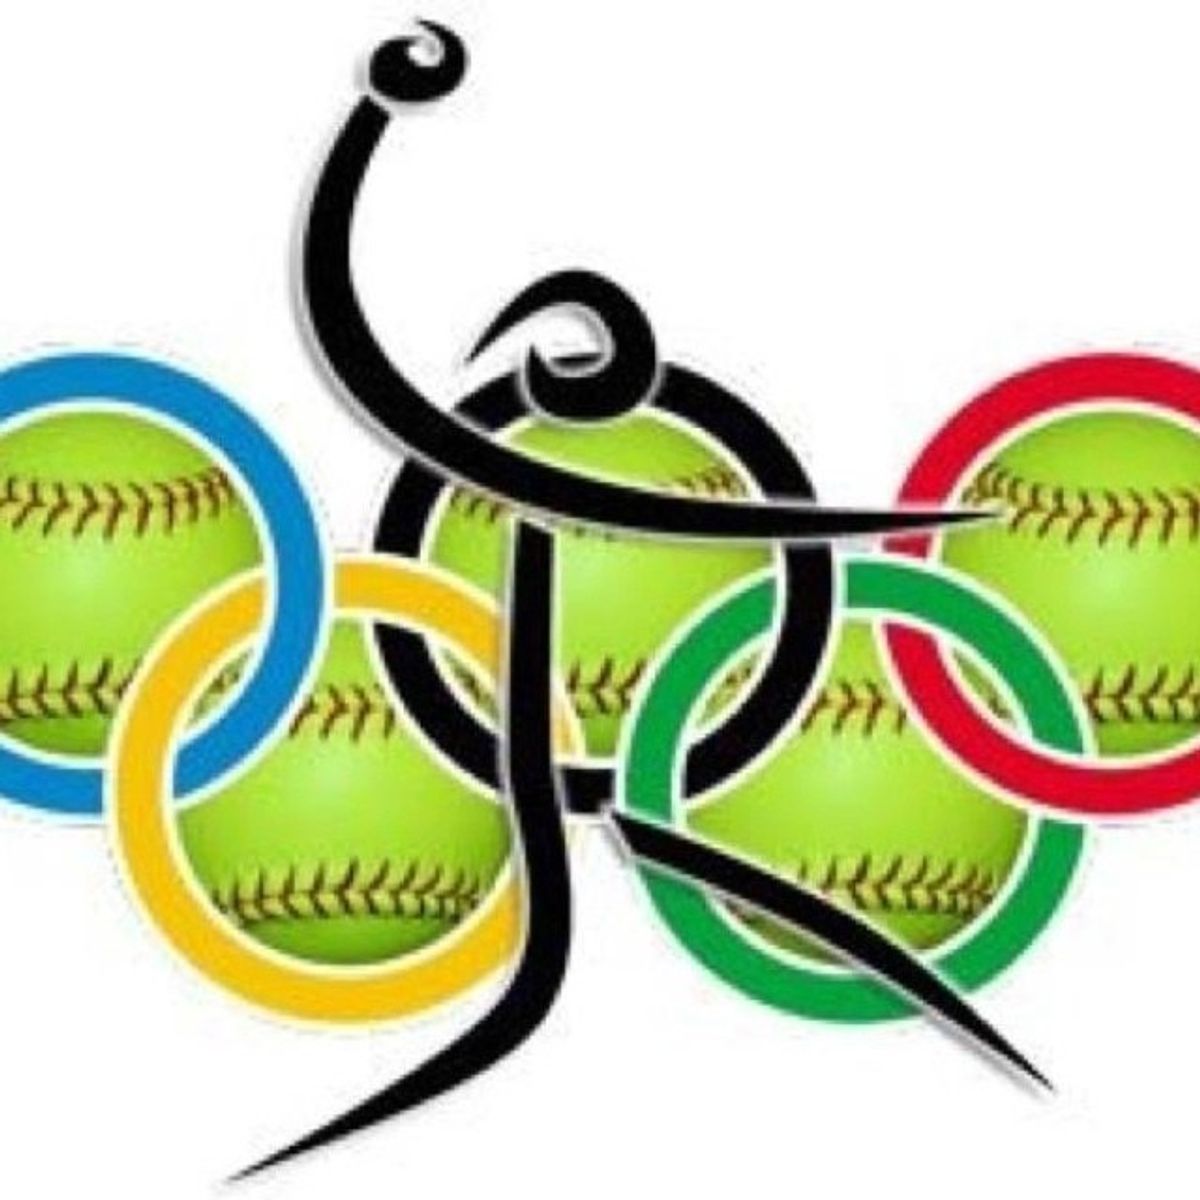 Softball Is Back In The Olympics